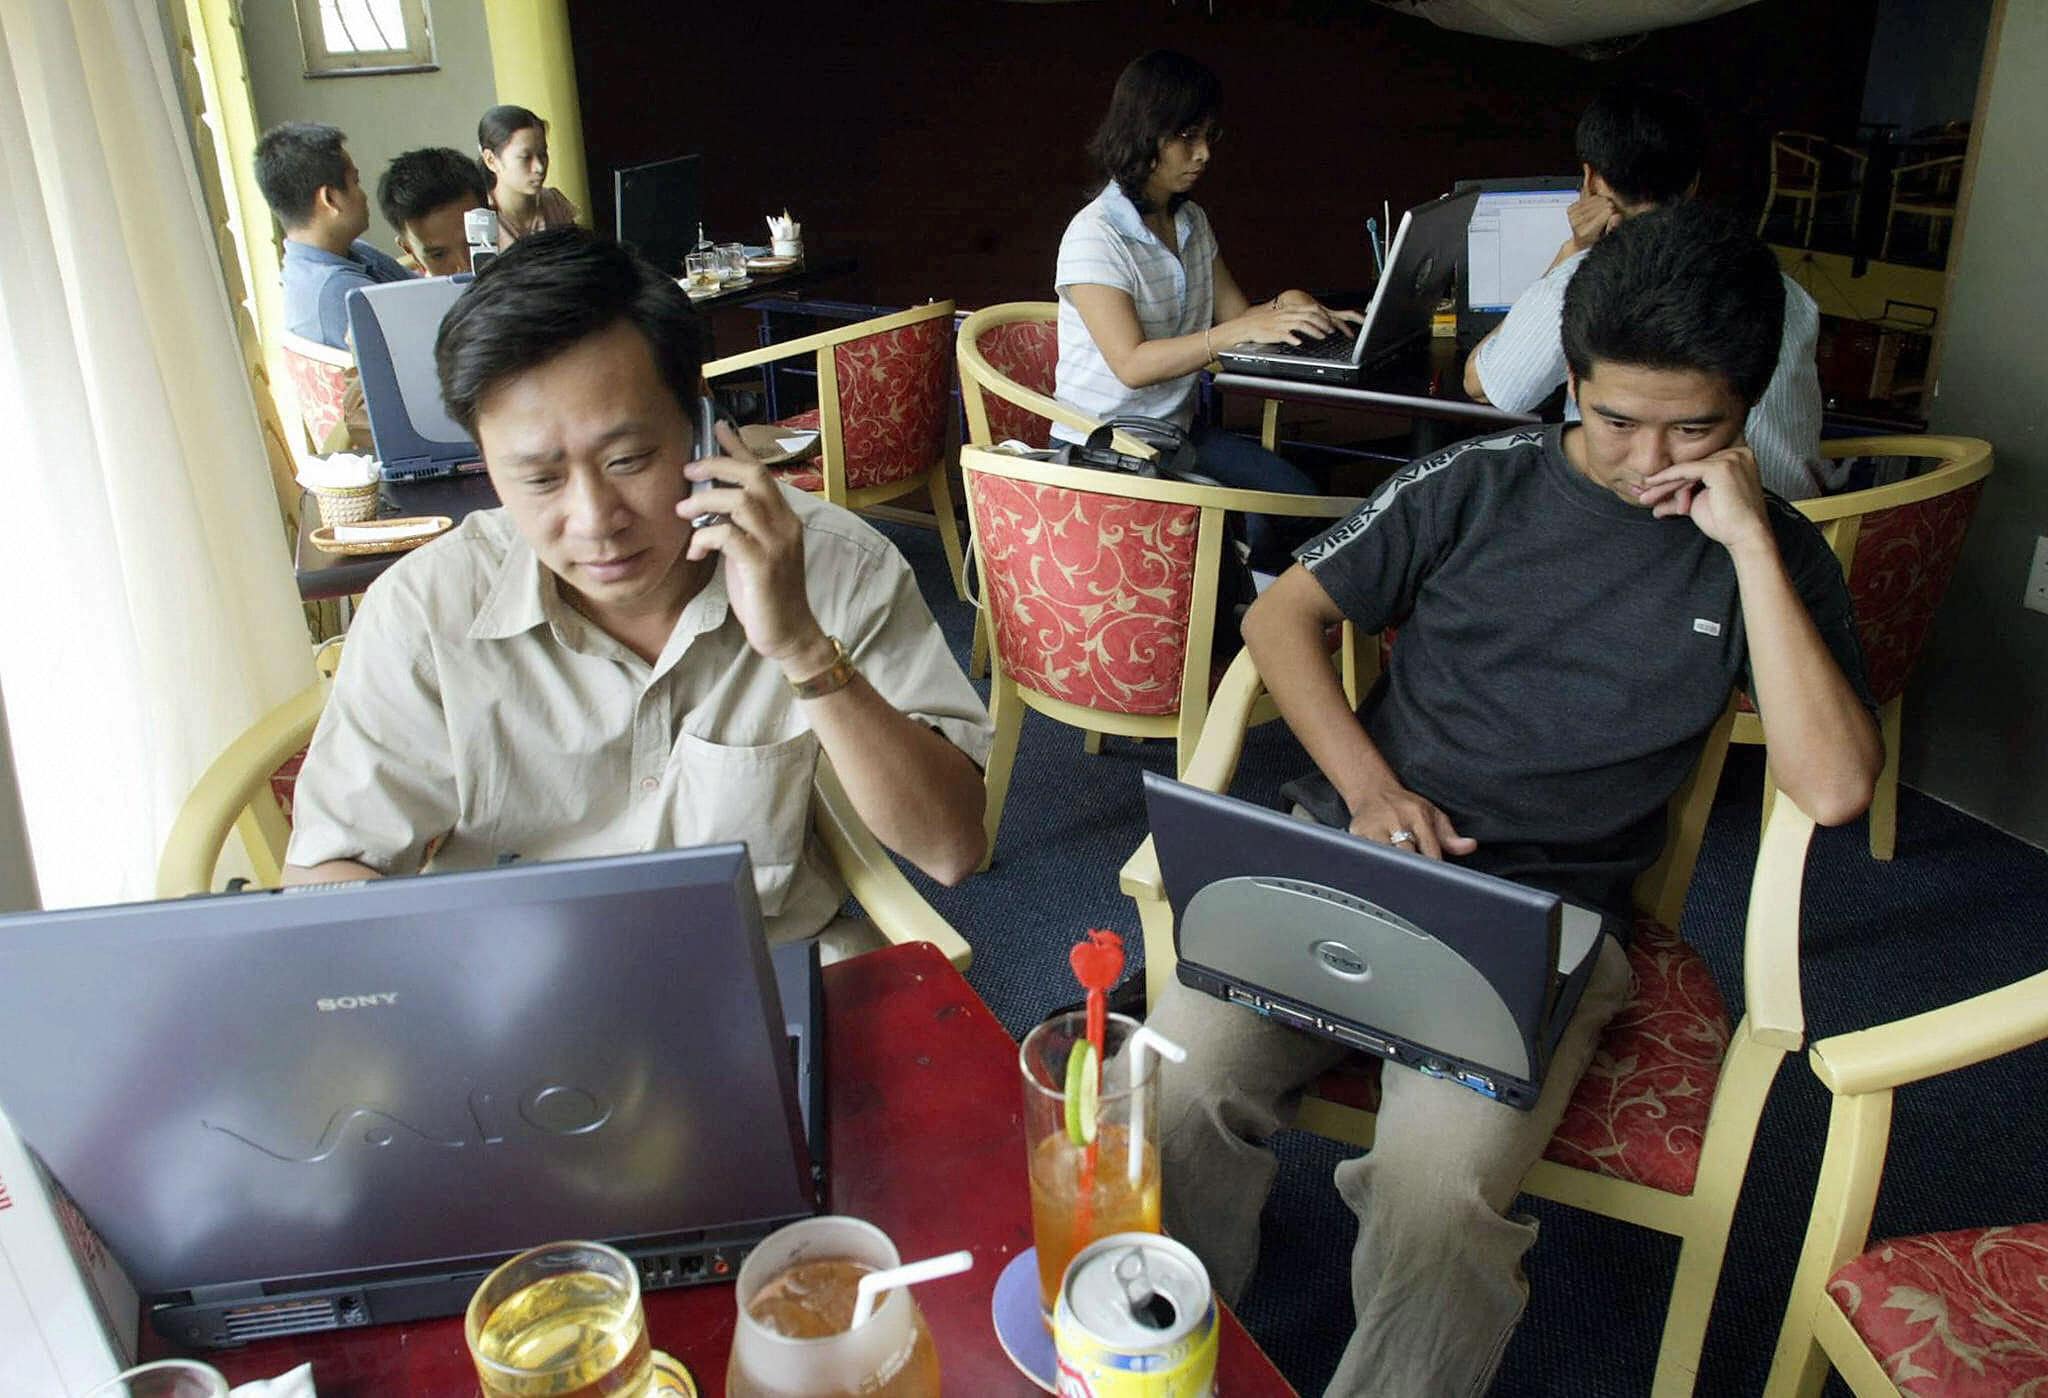 People surfing the internet at a local coffee shop, Ho Chi Minh City, Vietnam, 12 September 2004, HOANG DINH NAM/AFP/Getty Images